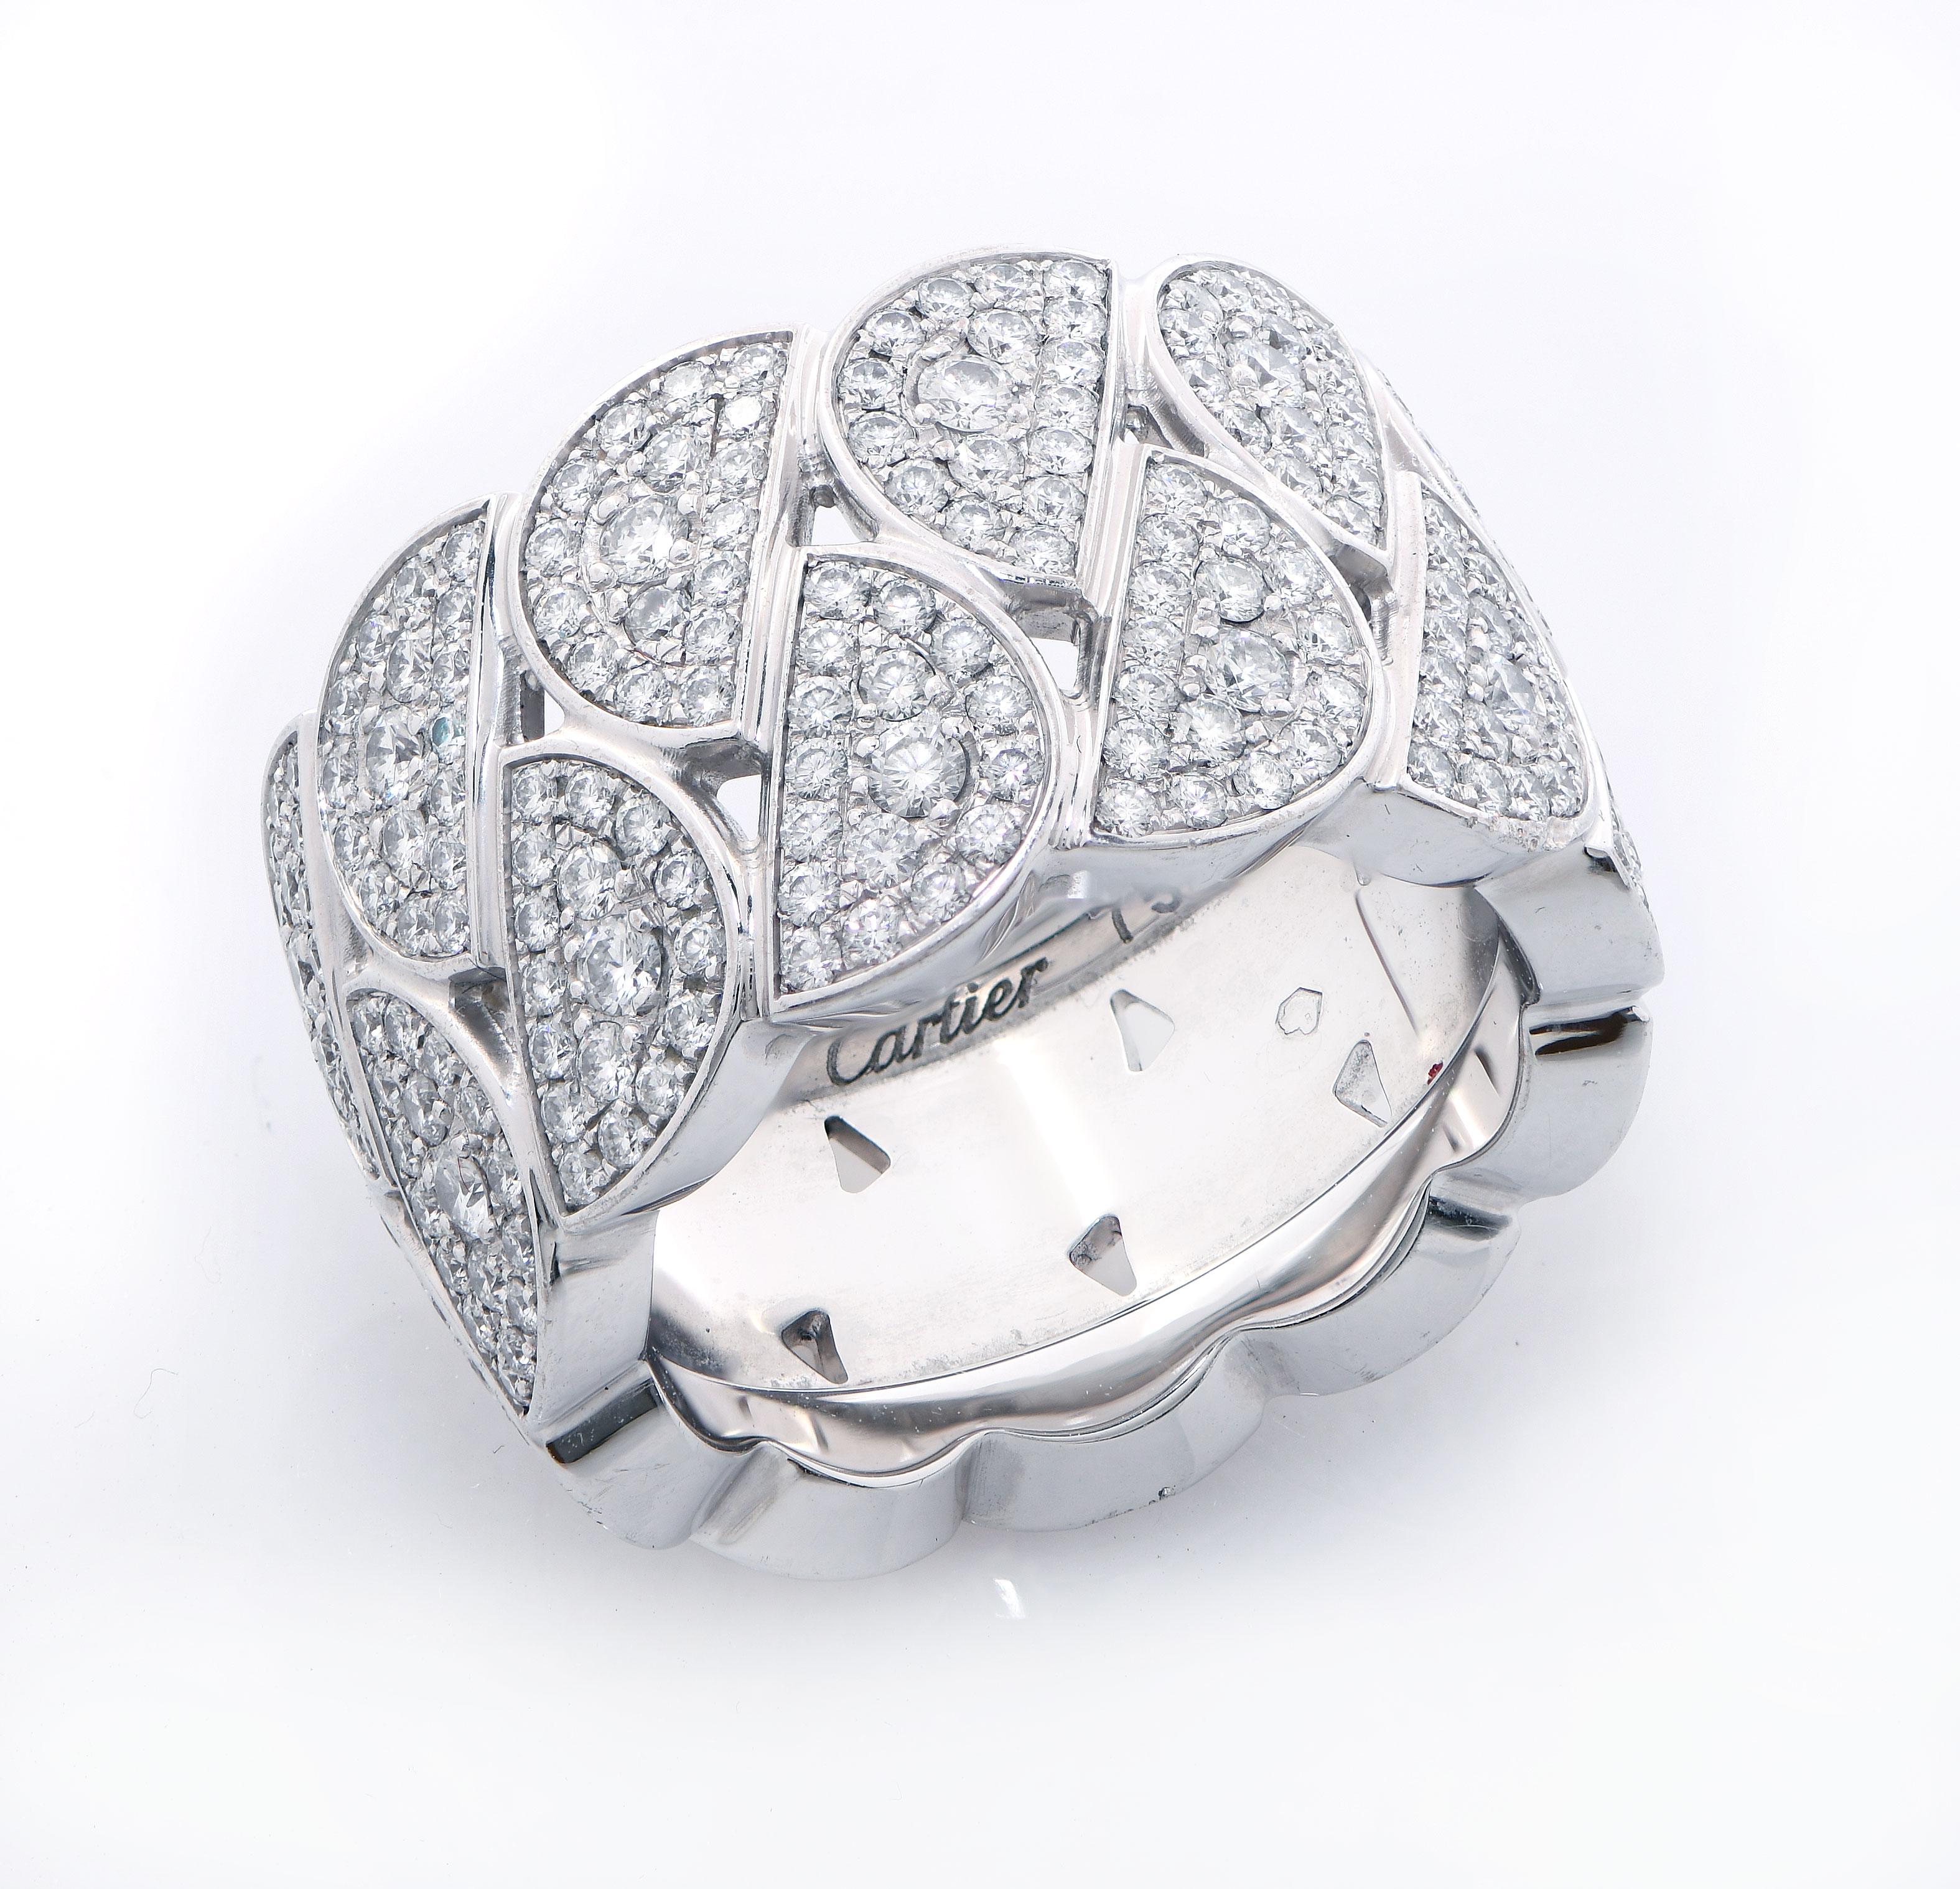 La Dona de Cartier Diamond Band in 18 Karat White Gold. This gorgeous ring is adorned with 374 round brilliant cut diamonds with a total estimated weight of 2.6 carats. These diamonds are Colorless and VVS2 and above in clarity. The La Dona